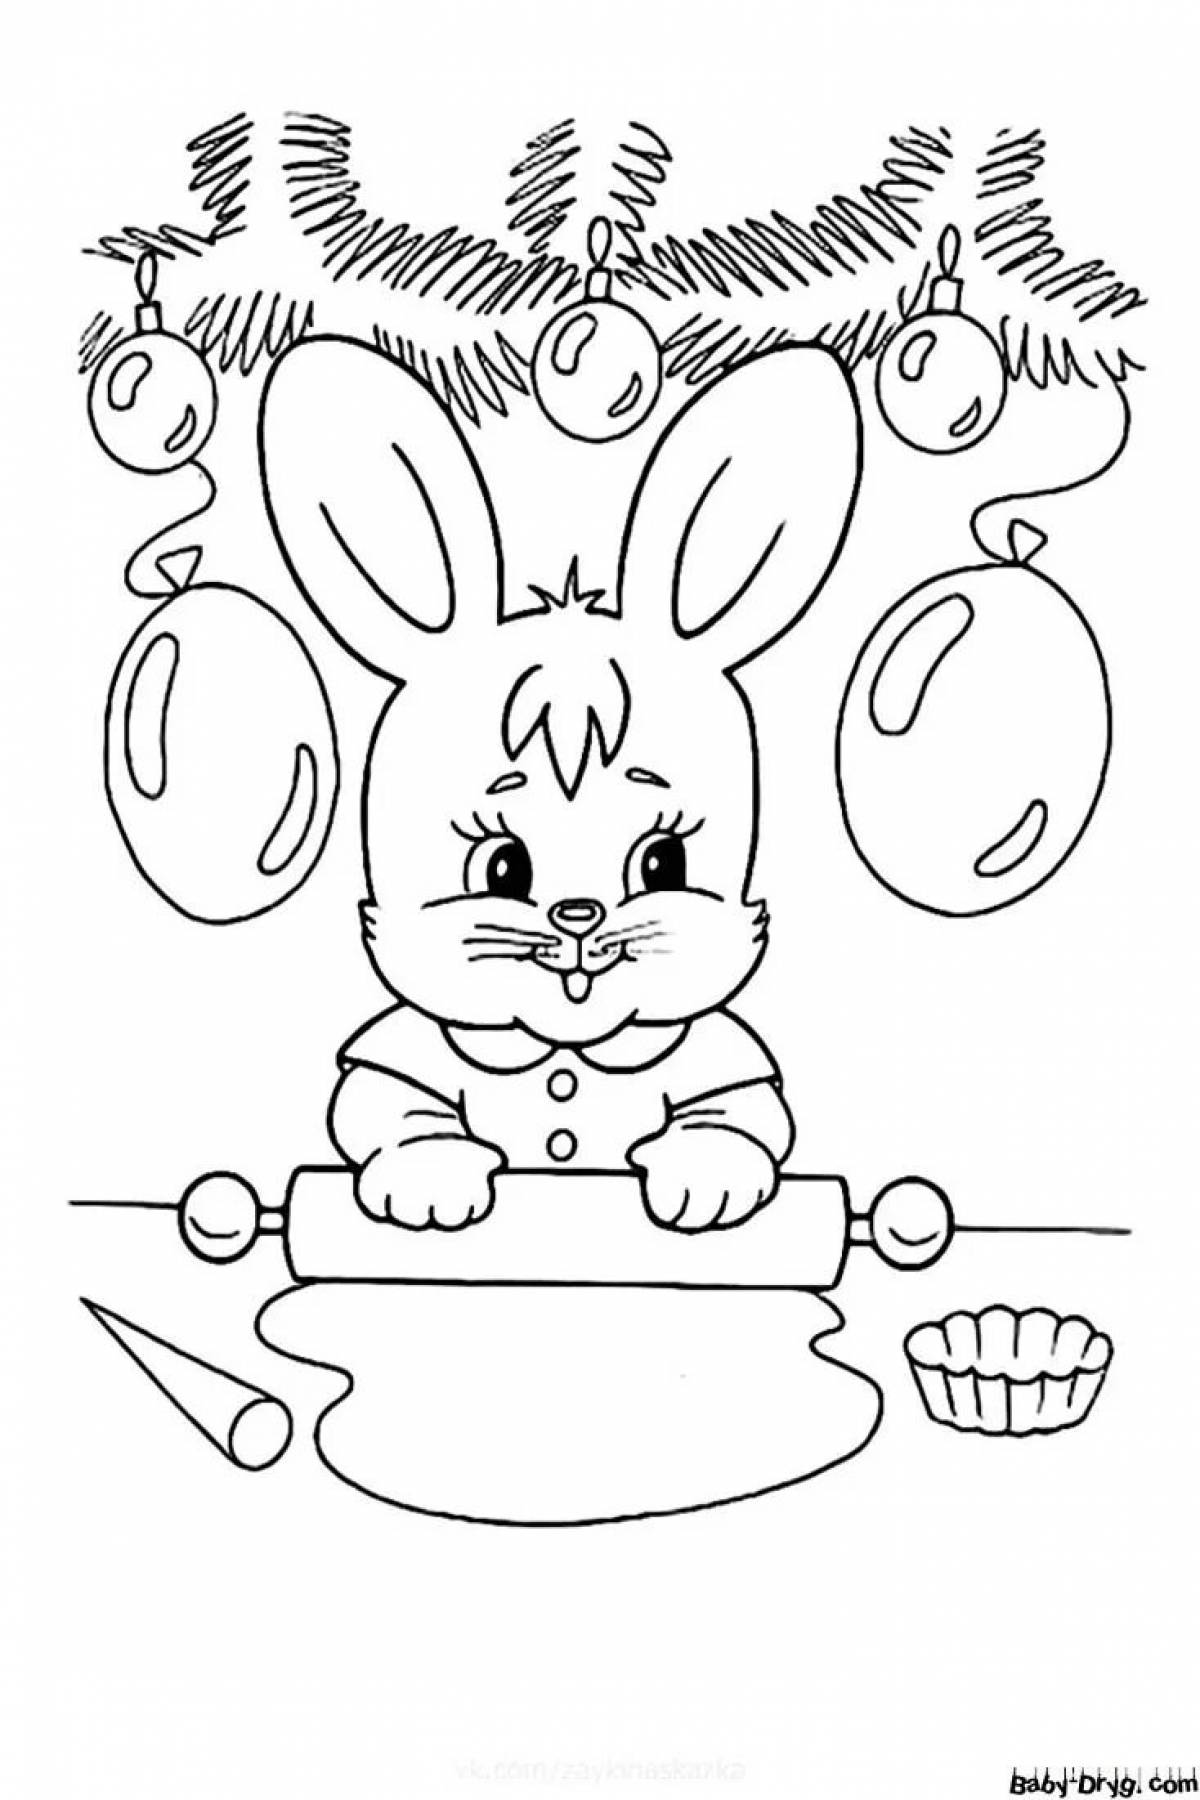 Christmas bunny coloring pages